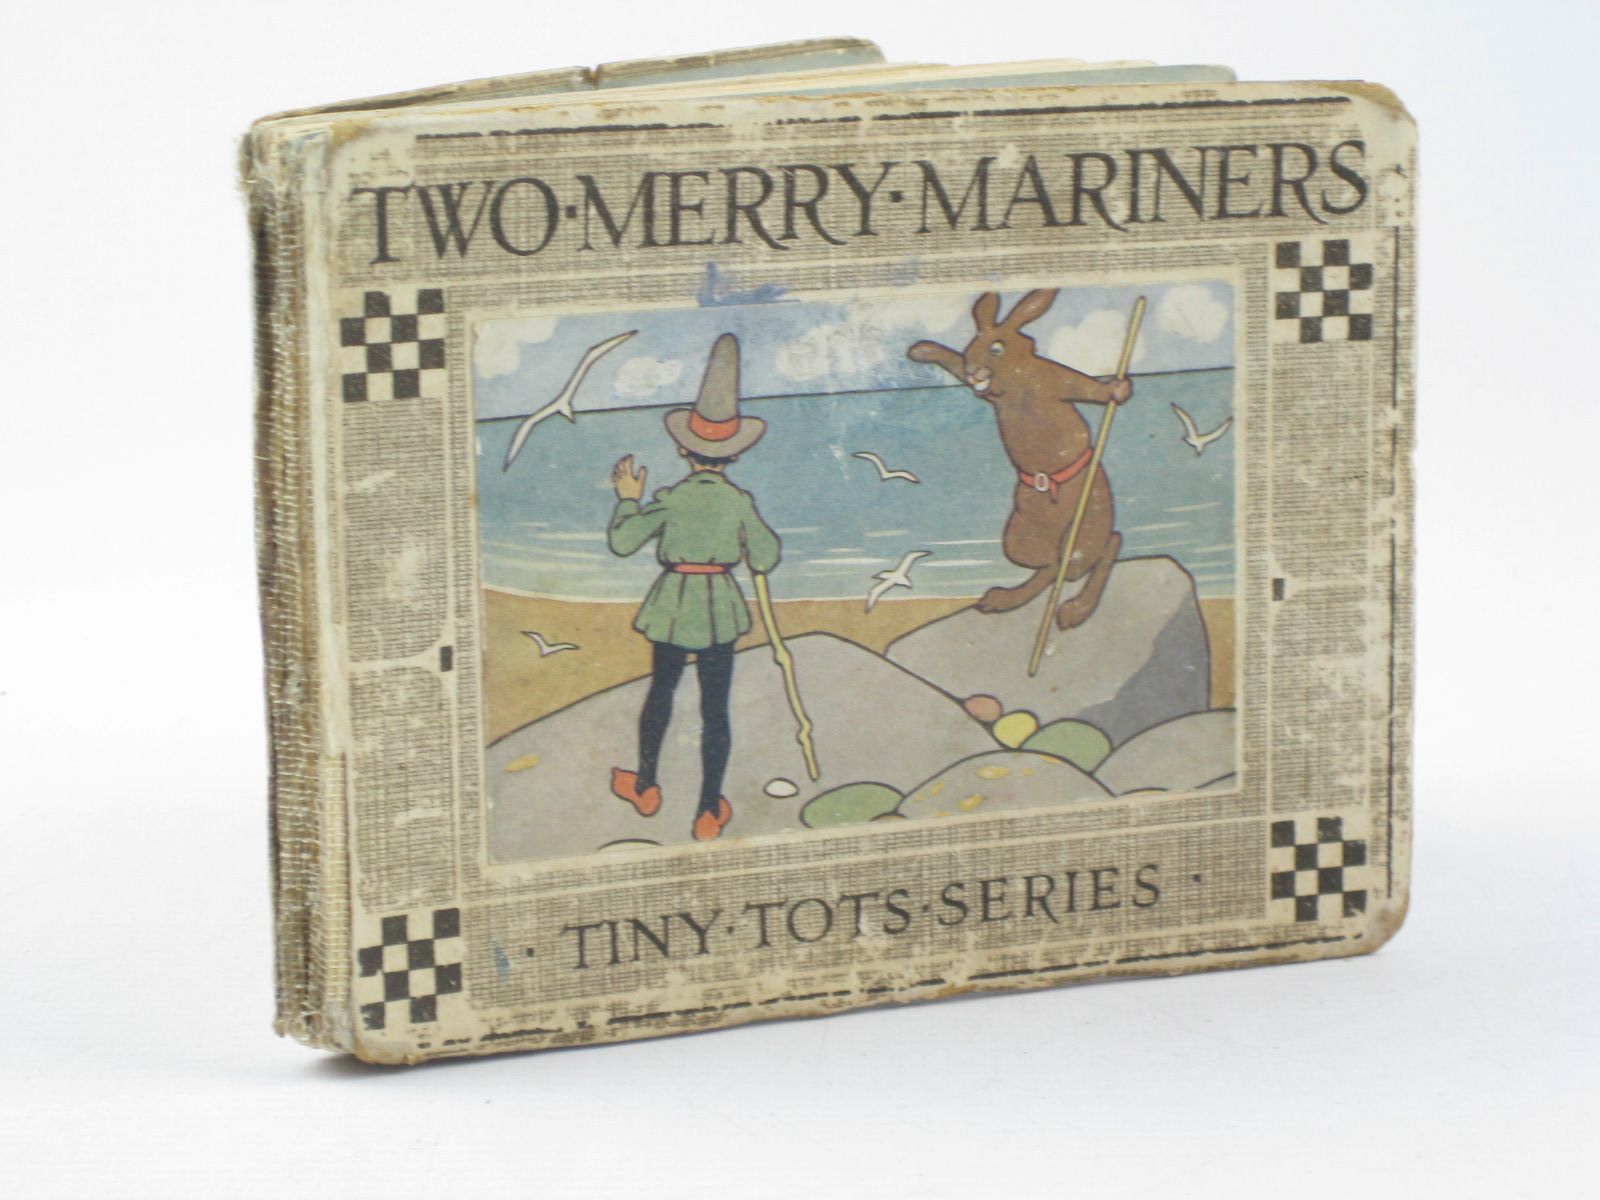 Photo of TWO MERRY MARINERS written by Brymer, John illustrated by Orr, Stewart published by Blackie & Son Ltd. (STOCK CODE: 1402298)  for sale by Stella & Rose's Books